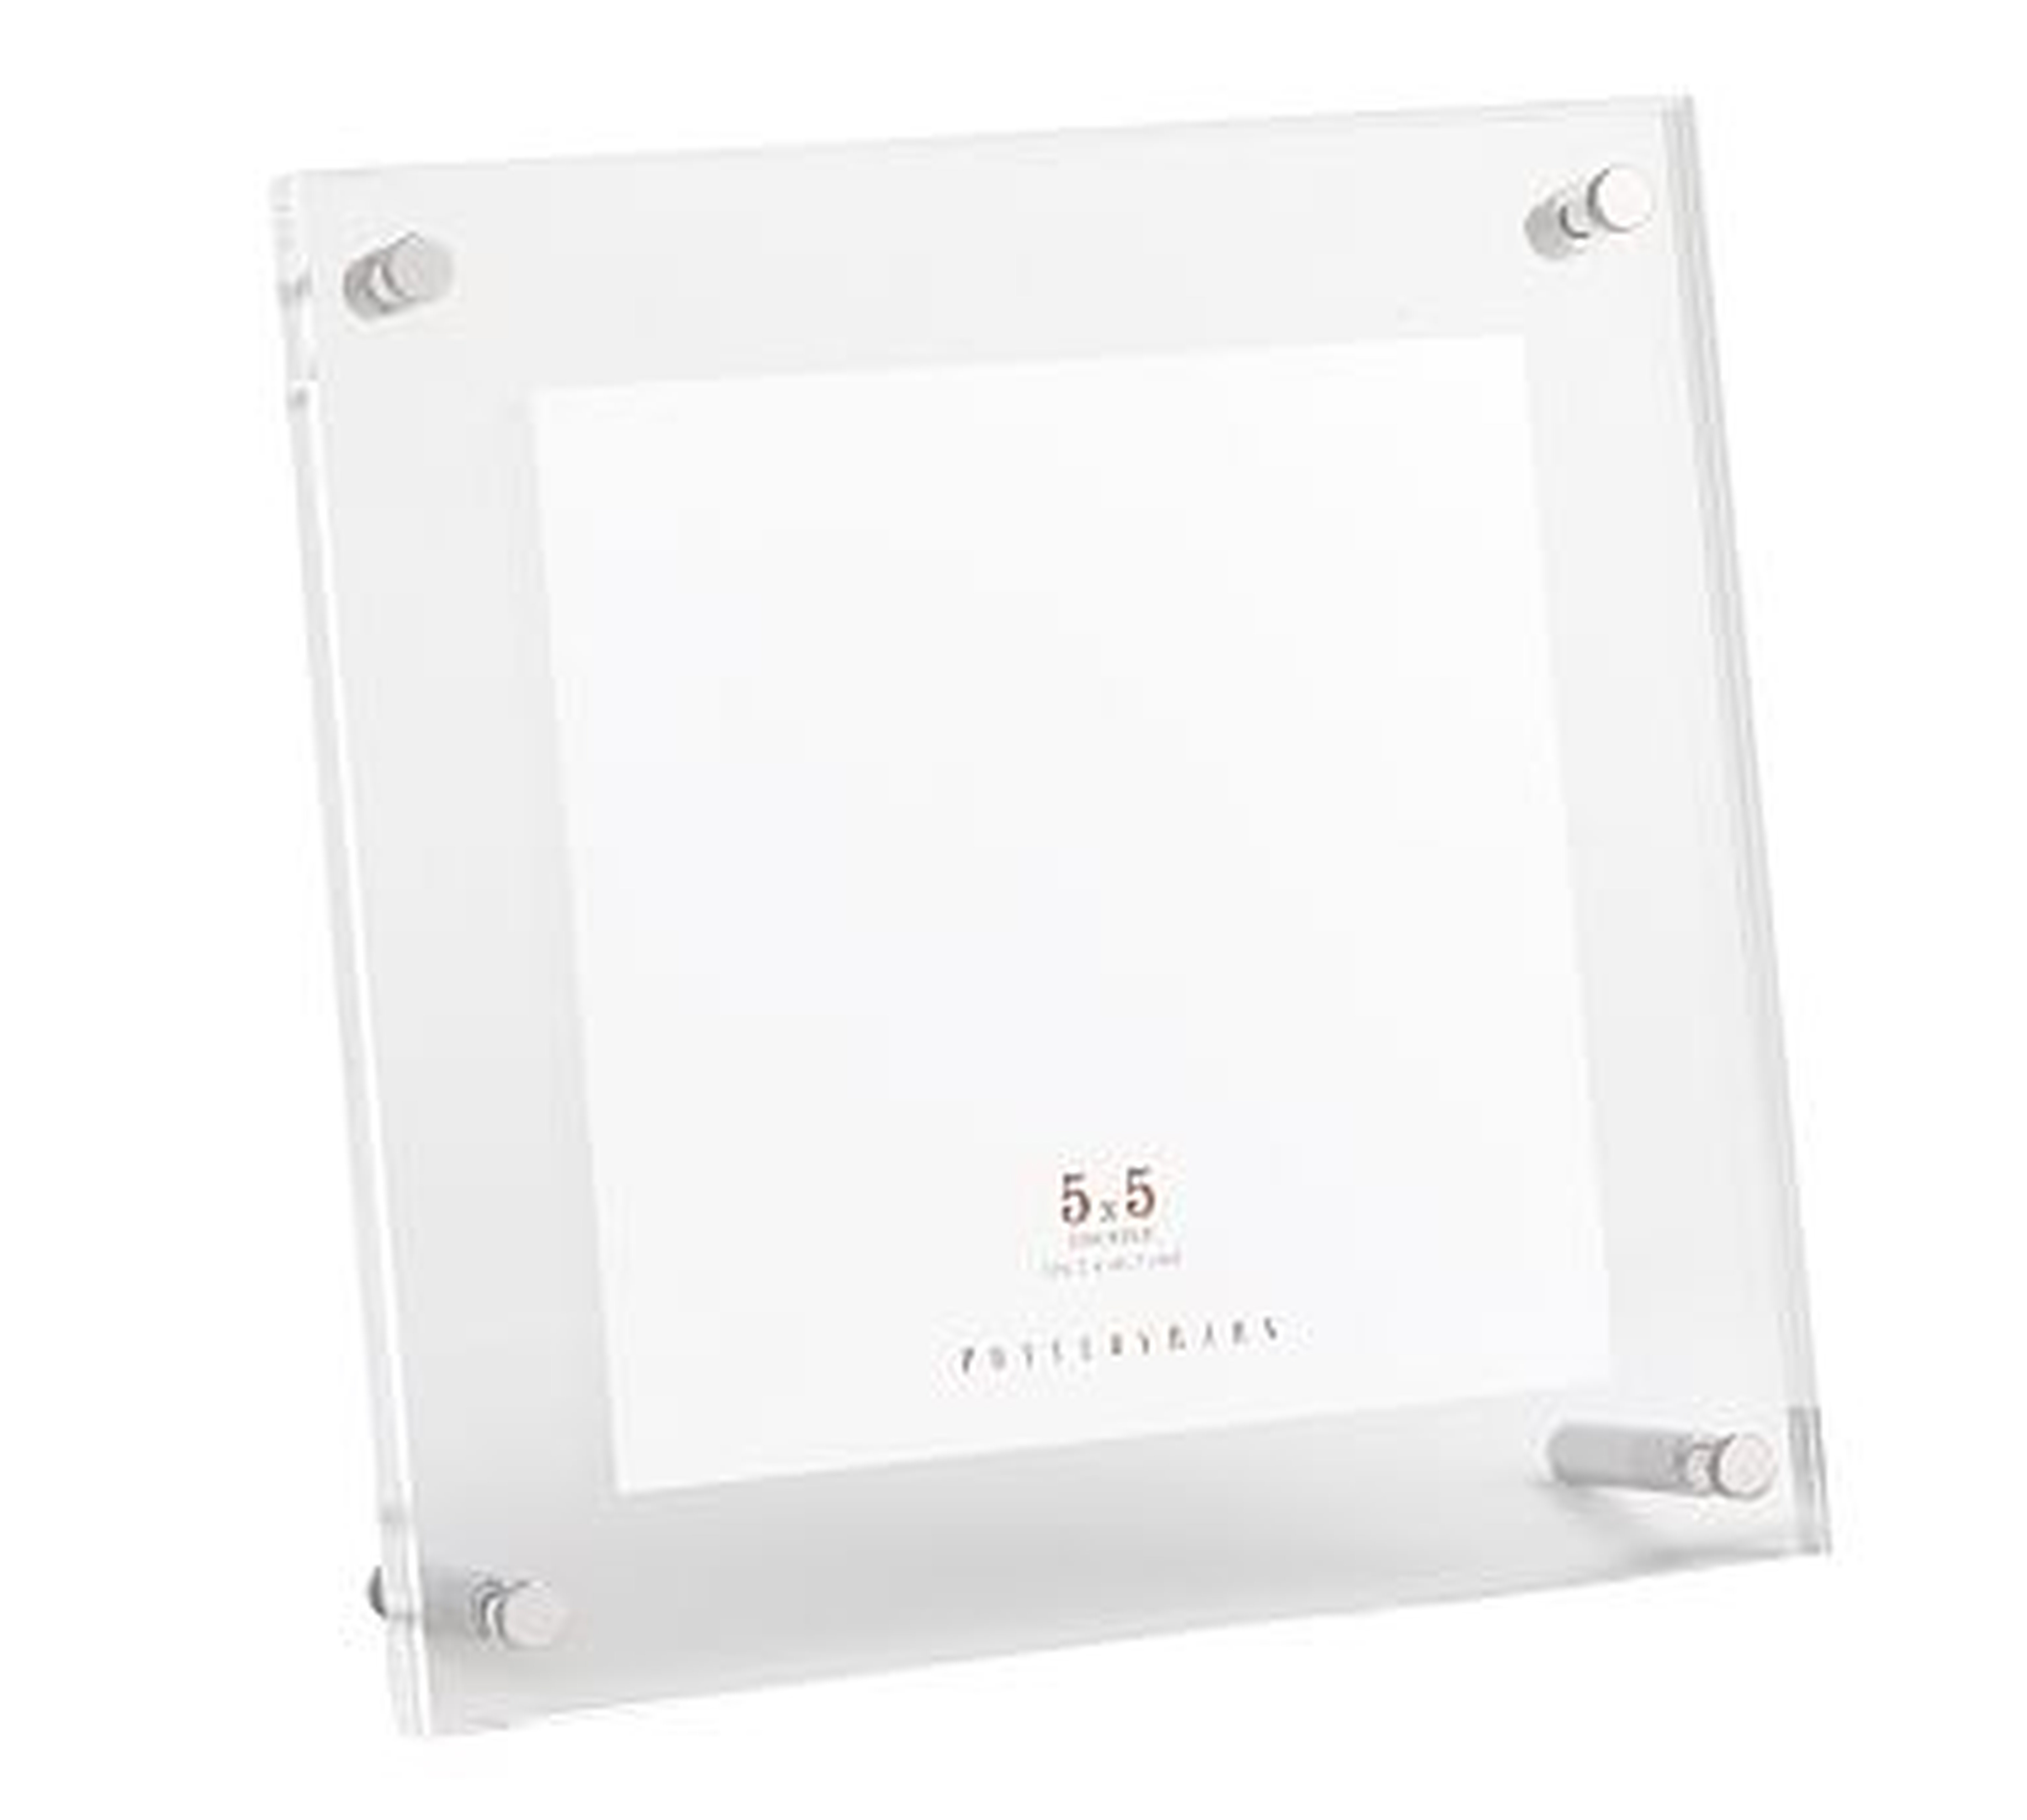 Acrylic Tabletop Picture Frame, Silver, 5" x 5" - Pottery Barn